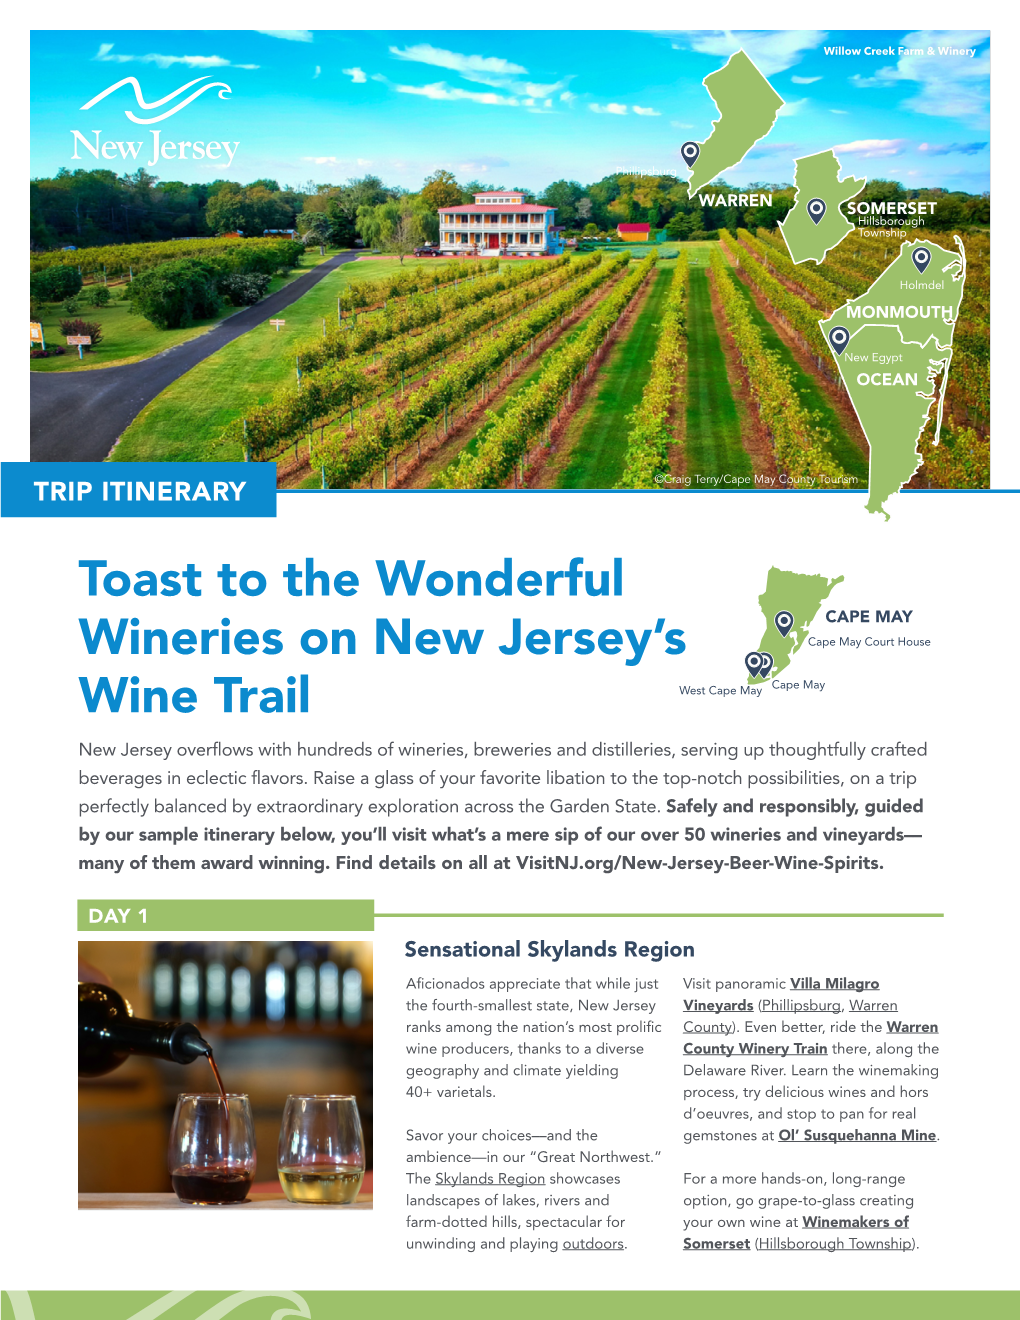 Toast to the Wonderful Wineries on New Jersey's Wine Trail